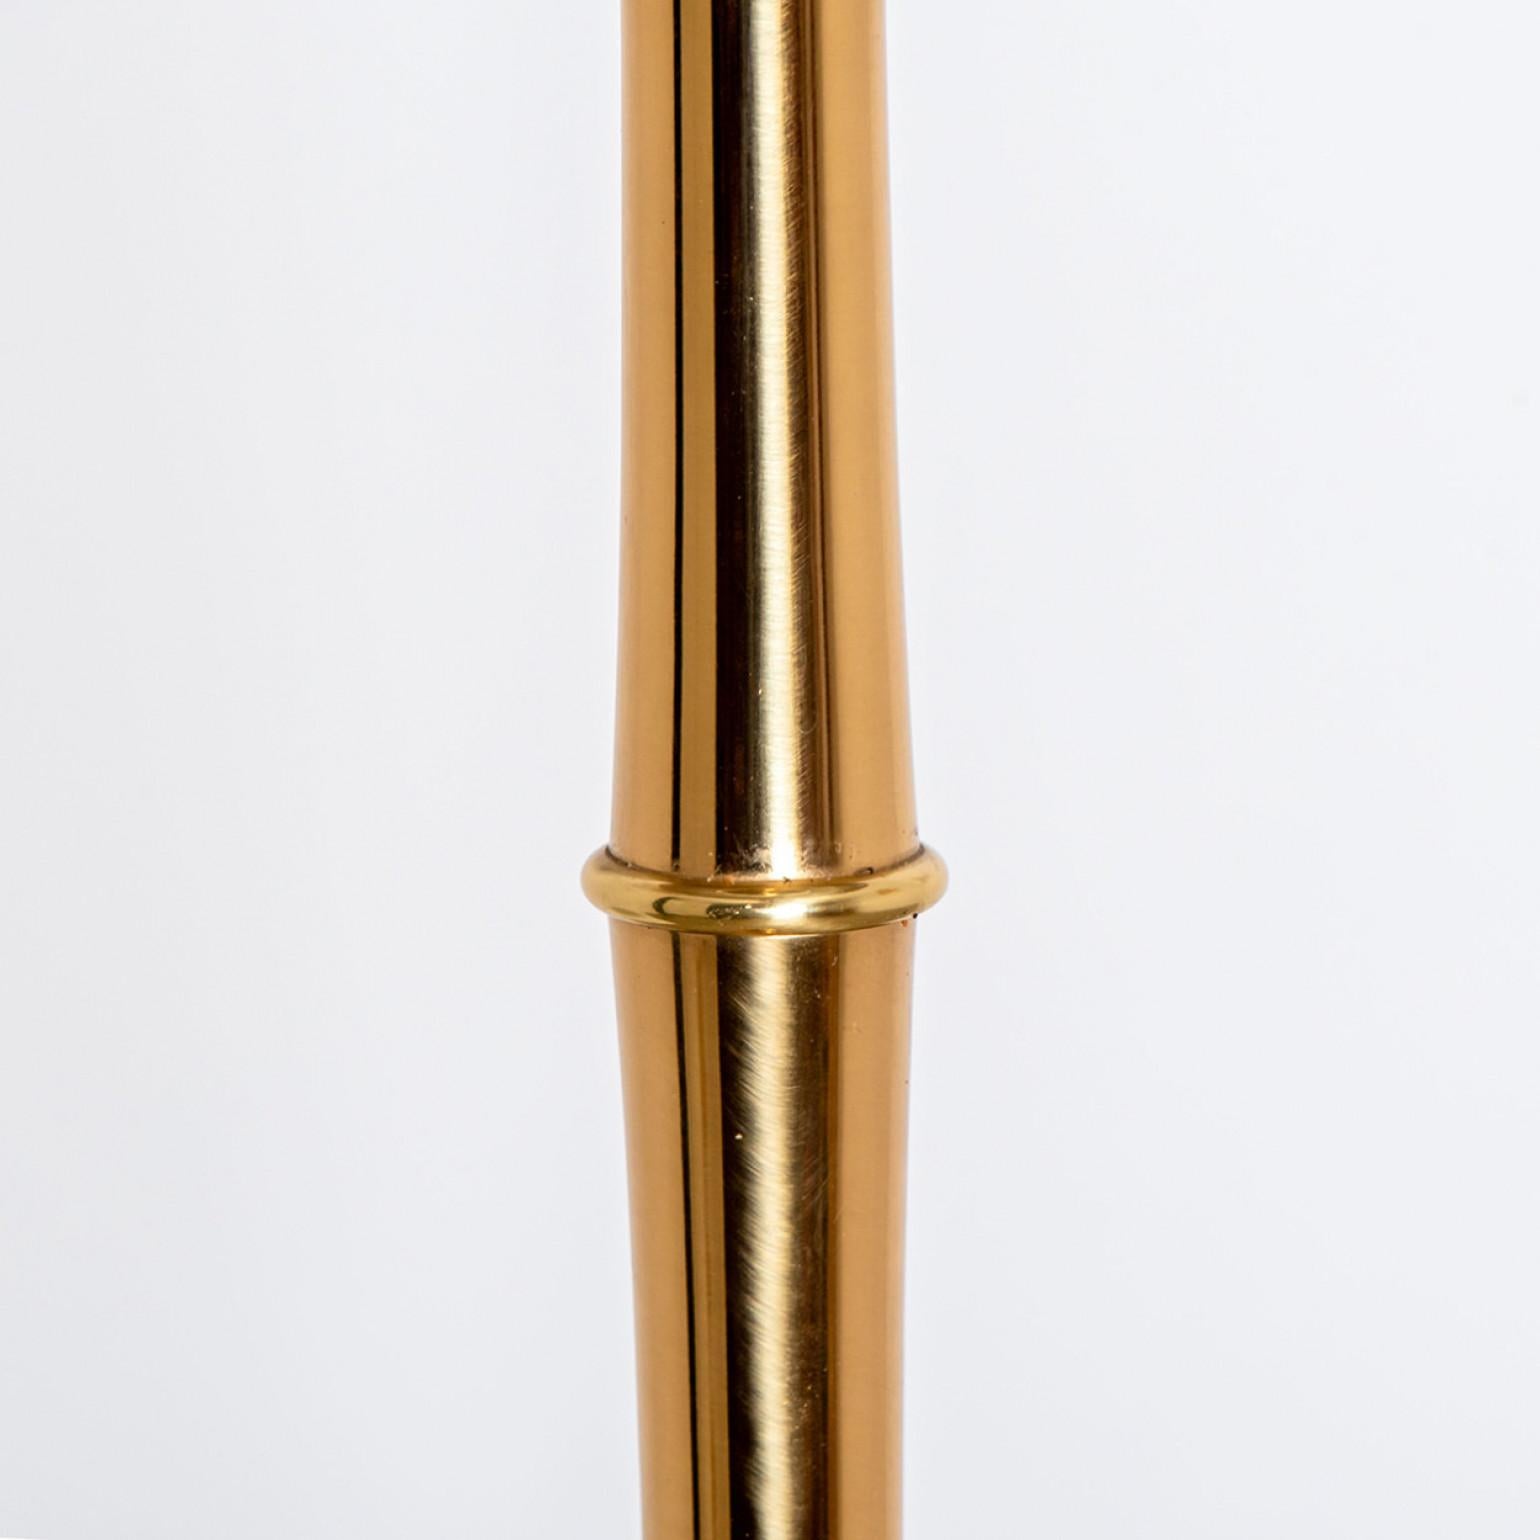 Pair of floor Lamps Gold Brass and Wood by Ingo Maurer, Europe, Germany, 1968 For Sale 1